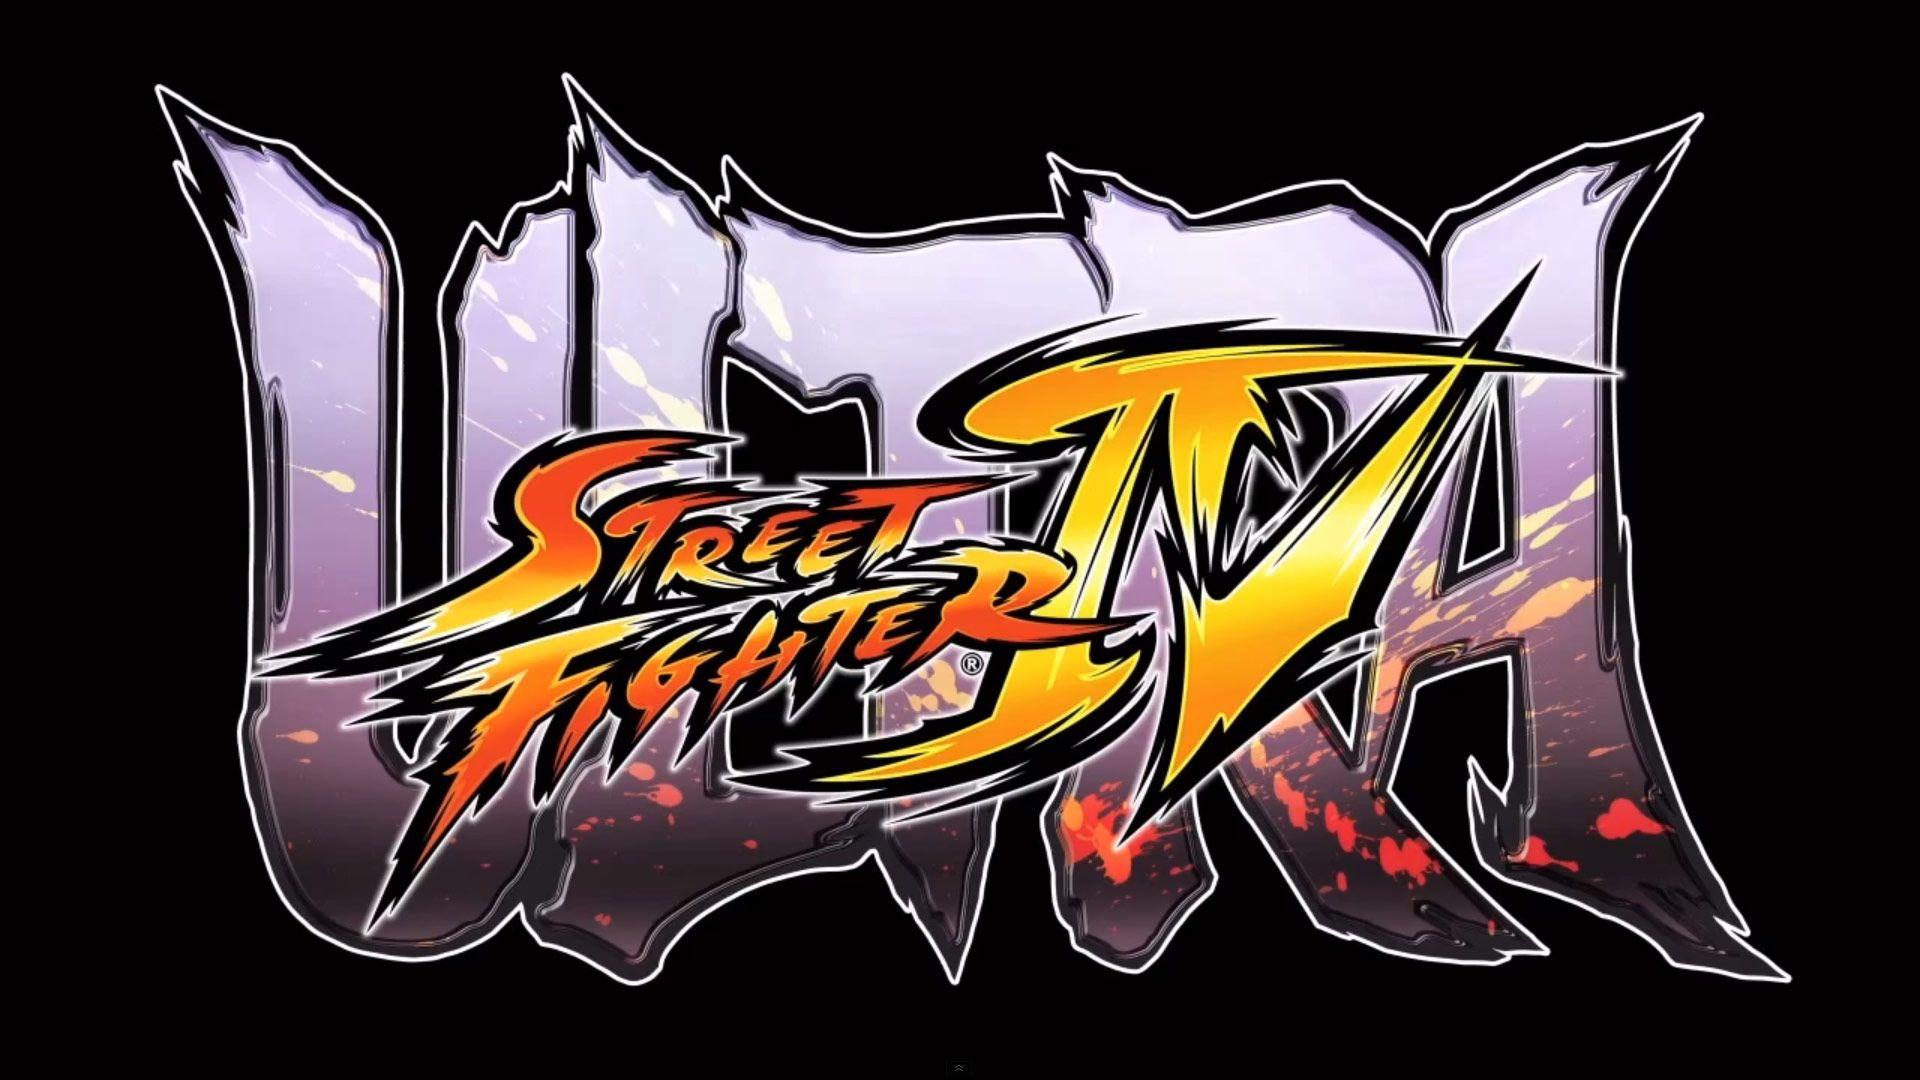 Ultra Street Fighter 4: HYPER FIGHTING. Capcom announces Edition